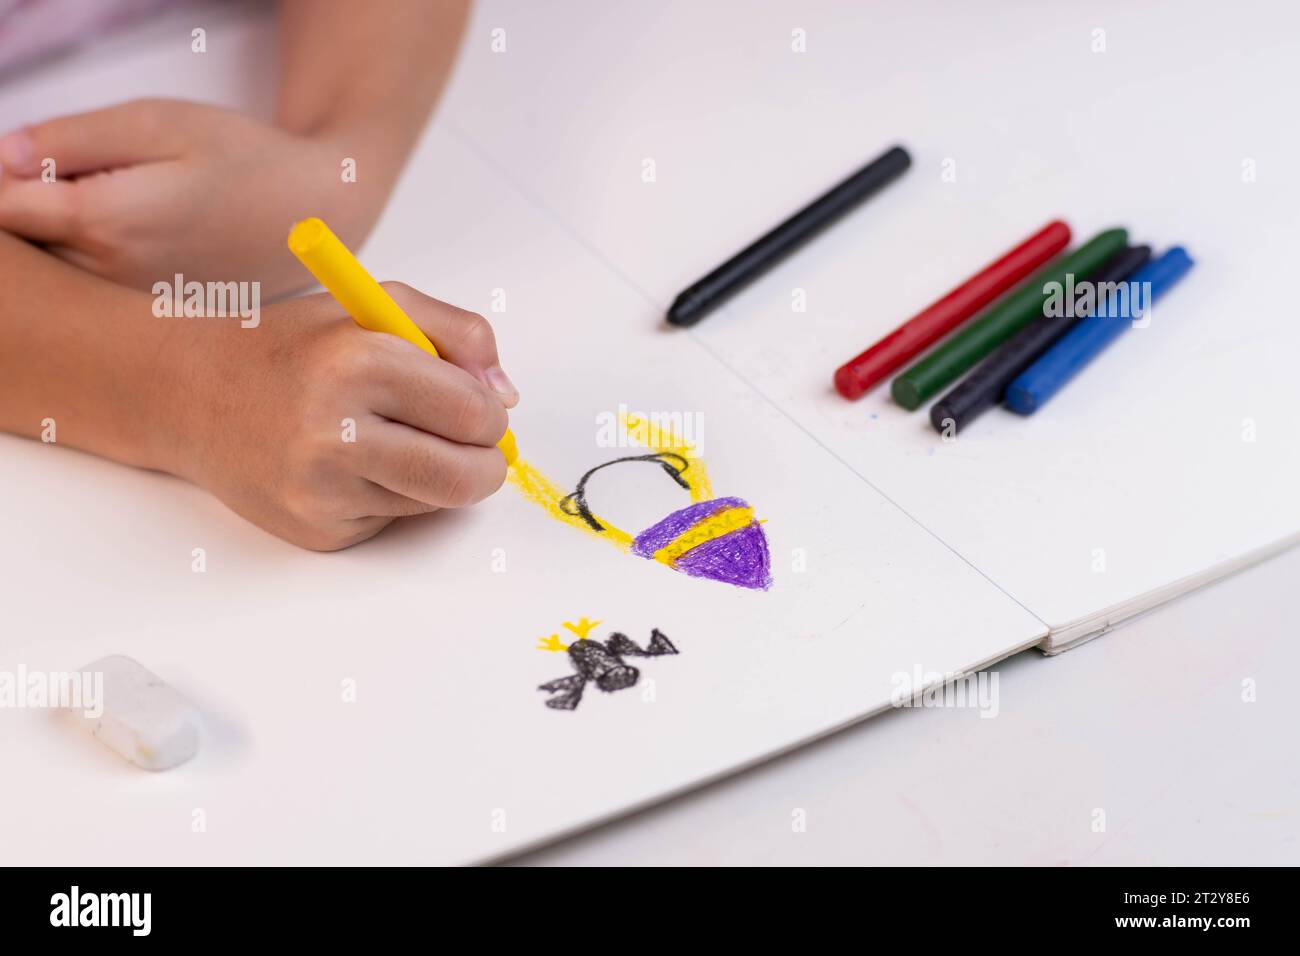 Girl drawing with crayons on a white sheet of paper. Crayons and kids drawing on white background. Close-up of a child's hand holding a crayon and dra Stock Photo